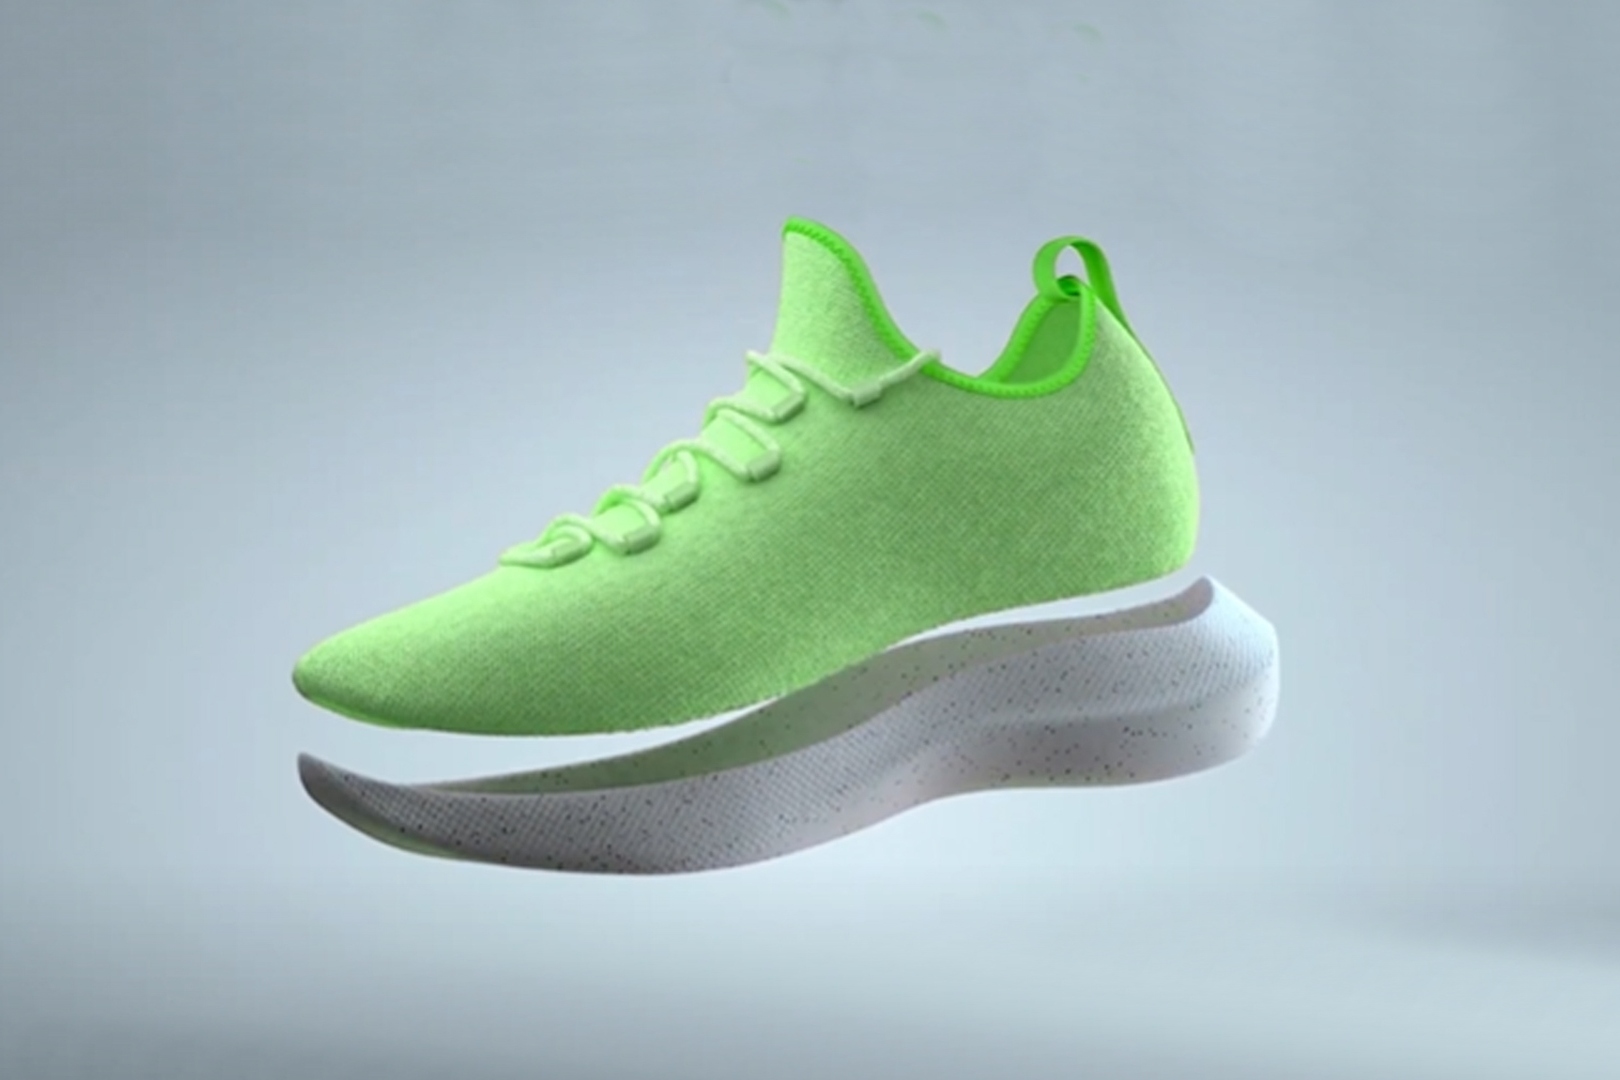 Coats latest footwear technology reduces material waste by 5%